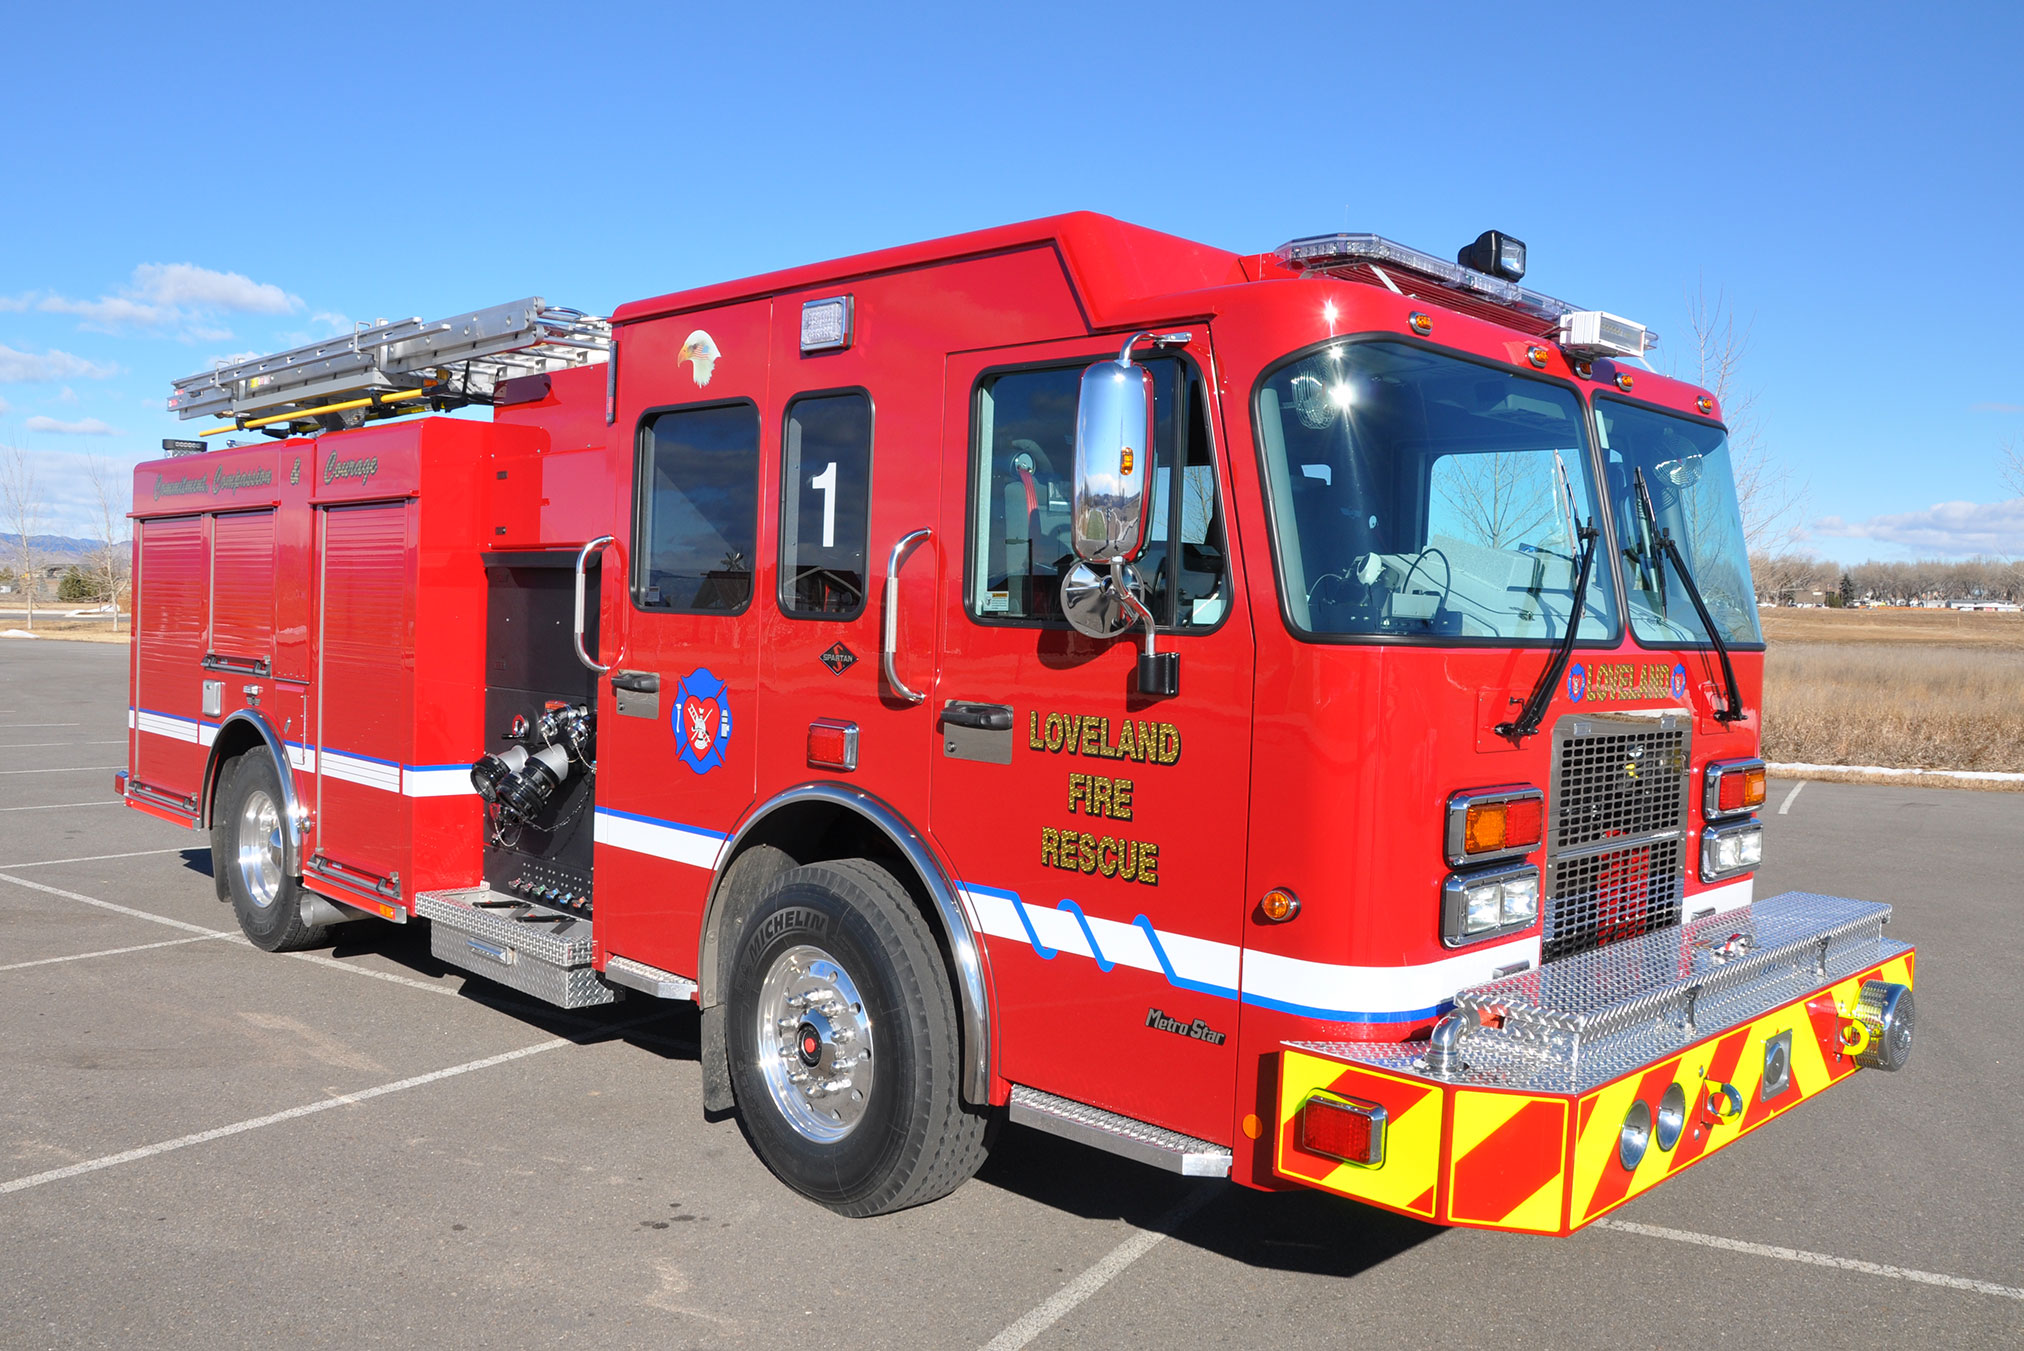 Featured image for “Loveland, CO Fire Department Rescue Pumper #769”